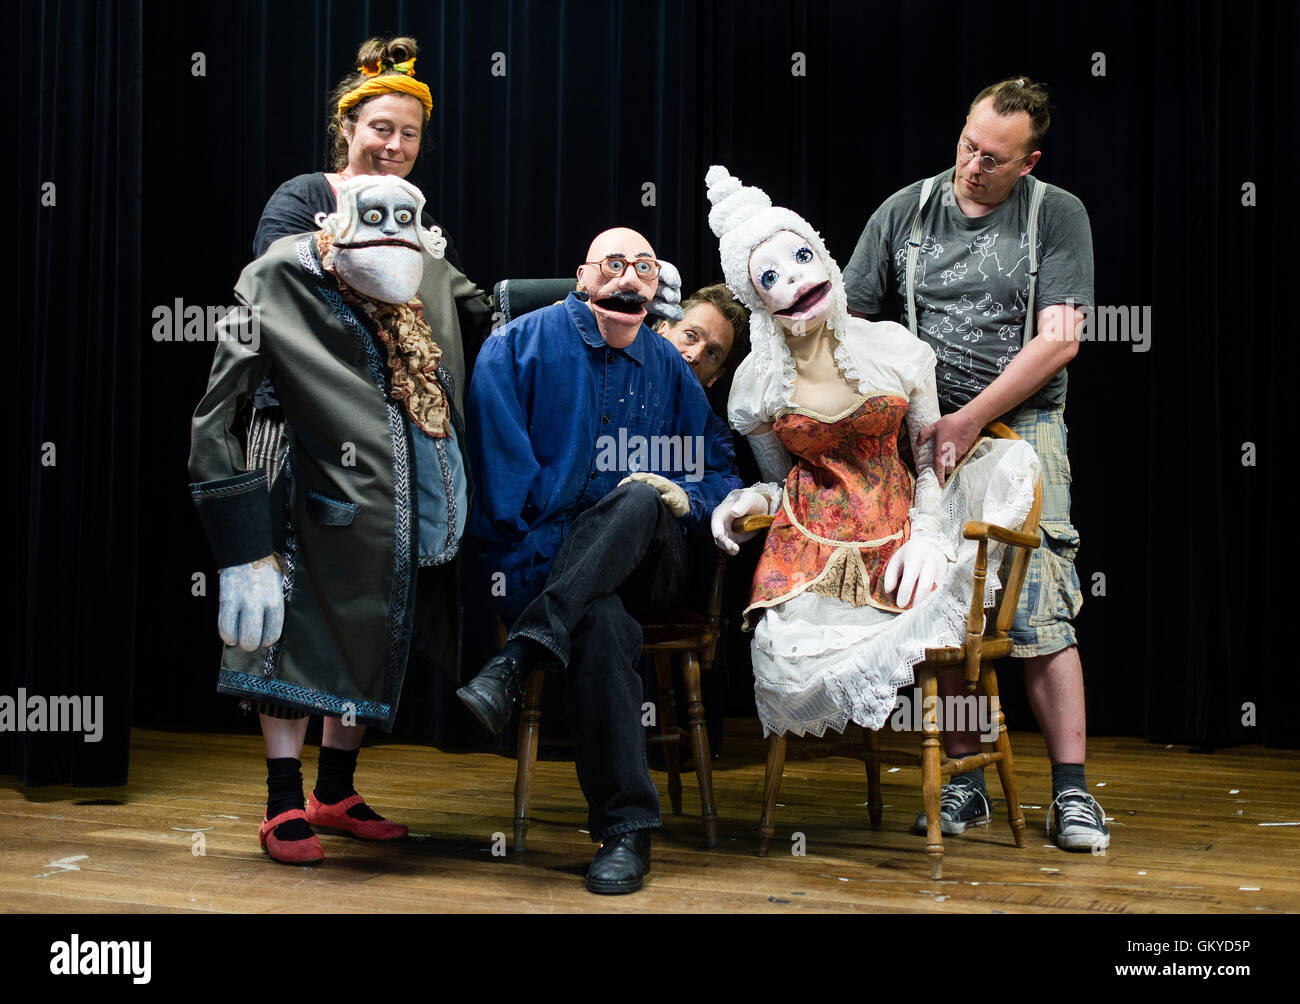 Northeim, Germany. 23rd Aug, 2016. The puppets Herr Heidegger (l-r), animated by Ruth Brockhausen, Herr Kasurke, animated by Heiko Brockhausen, and Mary, animated by Oliver Koehler at the Theatre der Nacht in Northeim, Germany, 23 August 2016. During a conference lasting from 29 August to 4 September 2016, puppeteers meet from all over Germany meet for courses, workshops and theater performances with different puppet types. Photo: Sebastian Gollnow/dpa/Alamy Live News Stock Photo